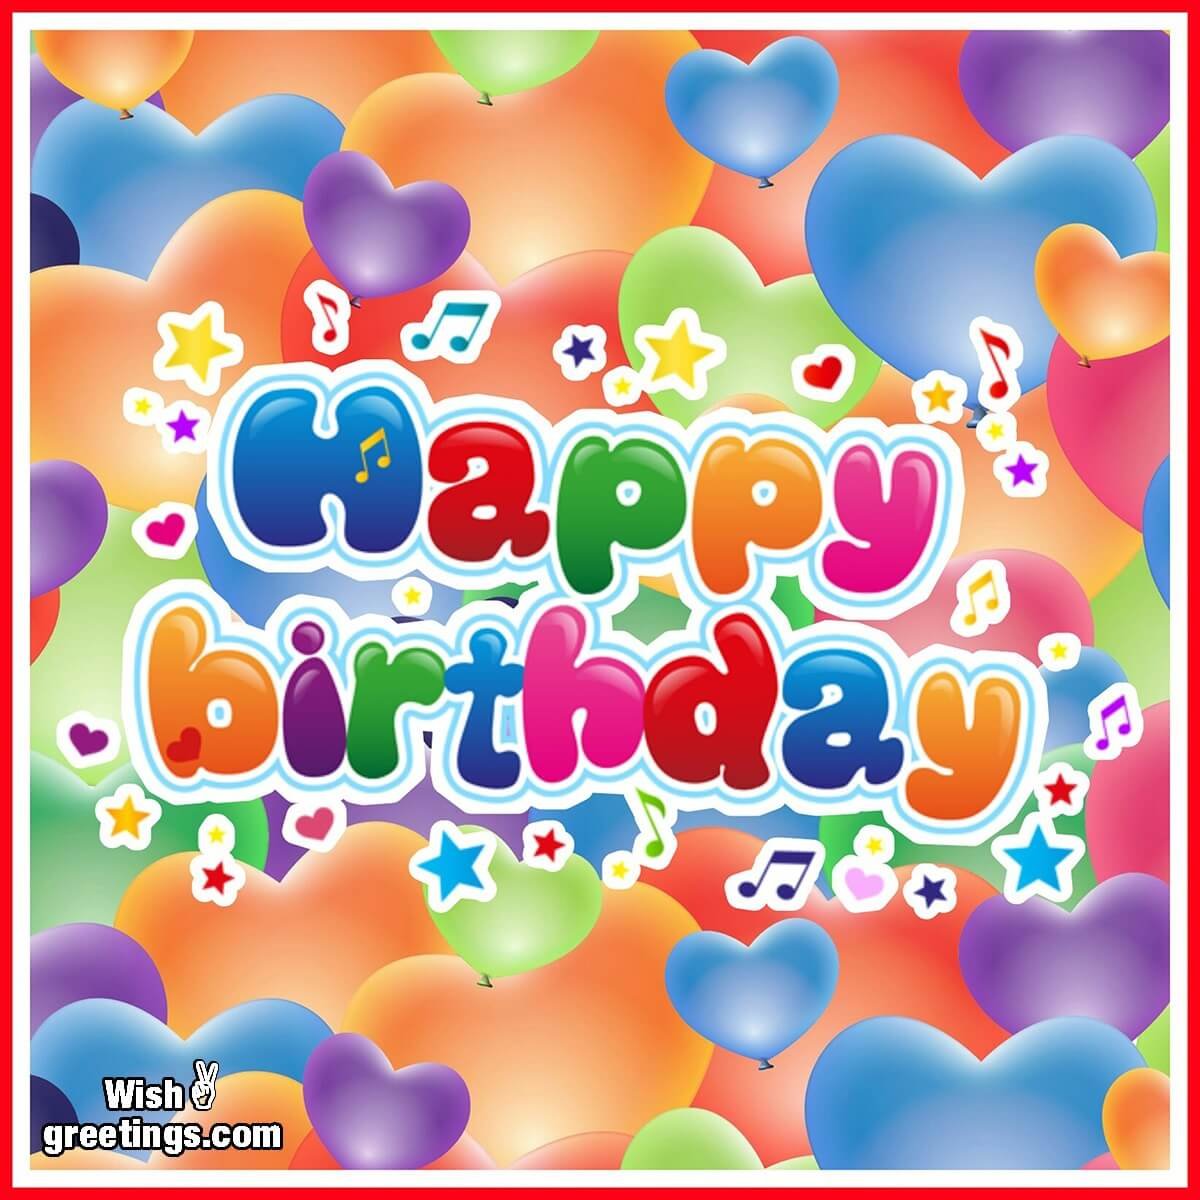 Happy Birthday Wishes Balloon Pictures - Wish Greetings